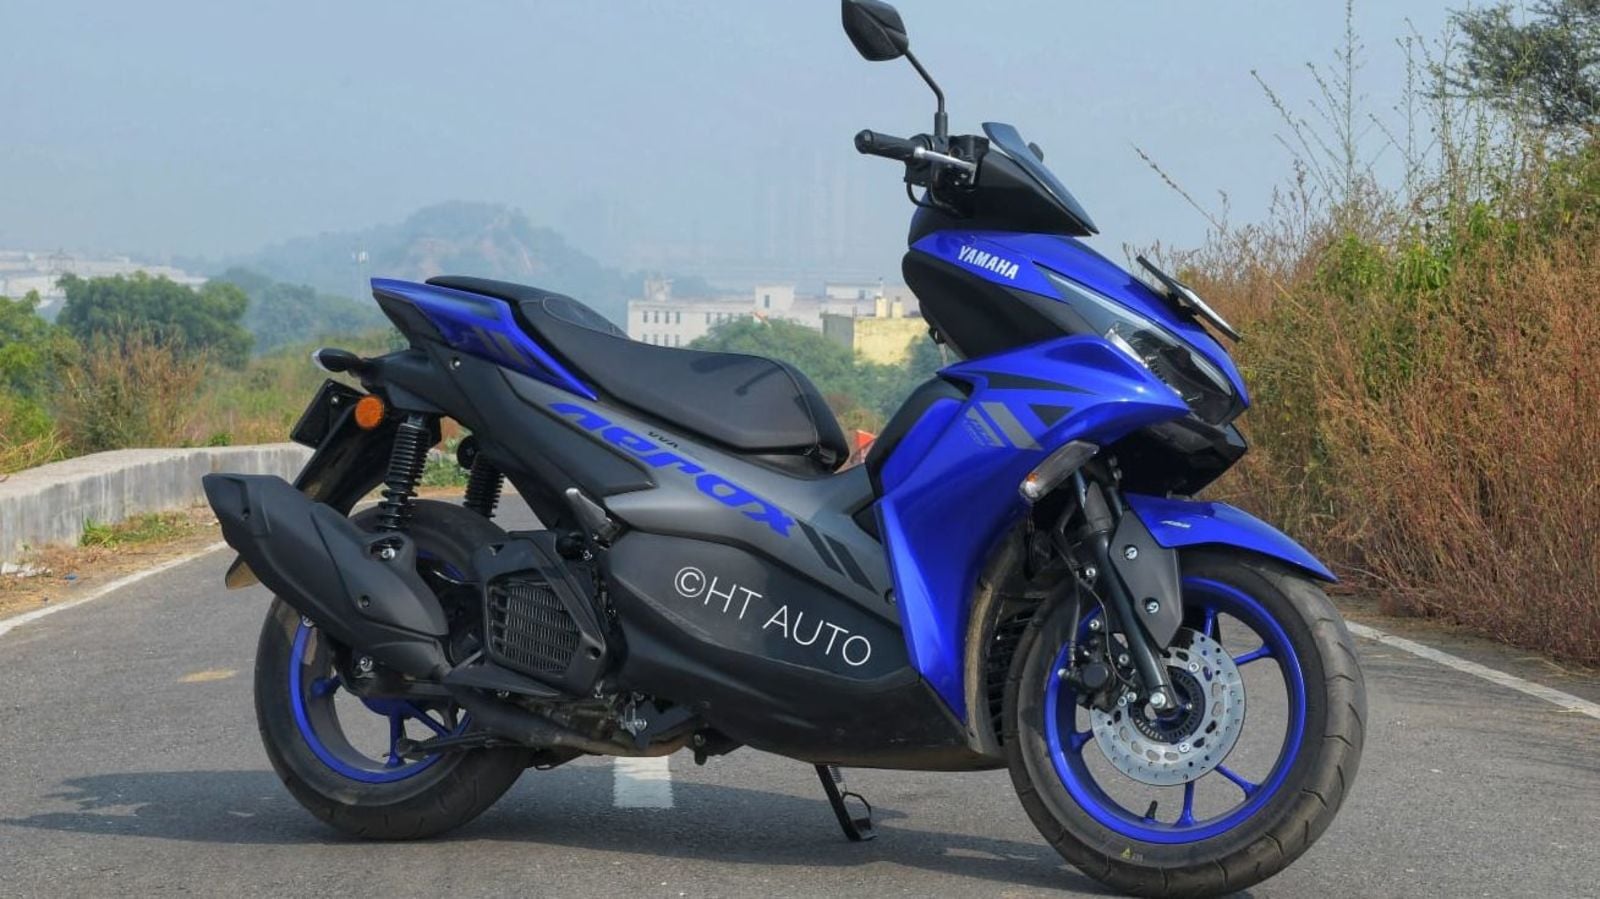 A day with the 2022 Yamaha Aerox 155  Ride Review  MOTOFOODIE